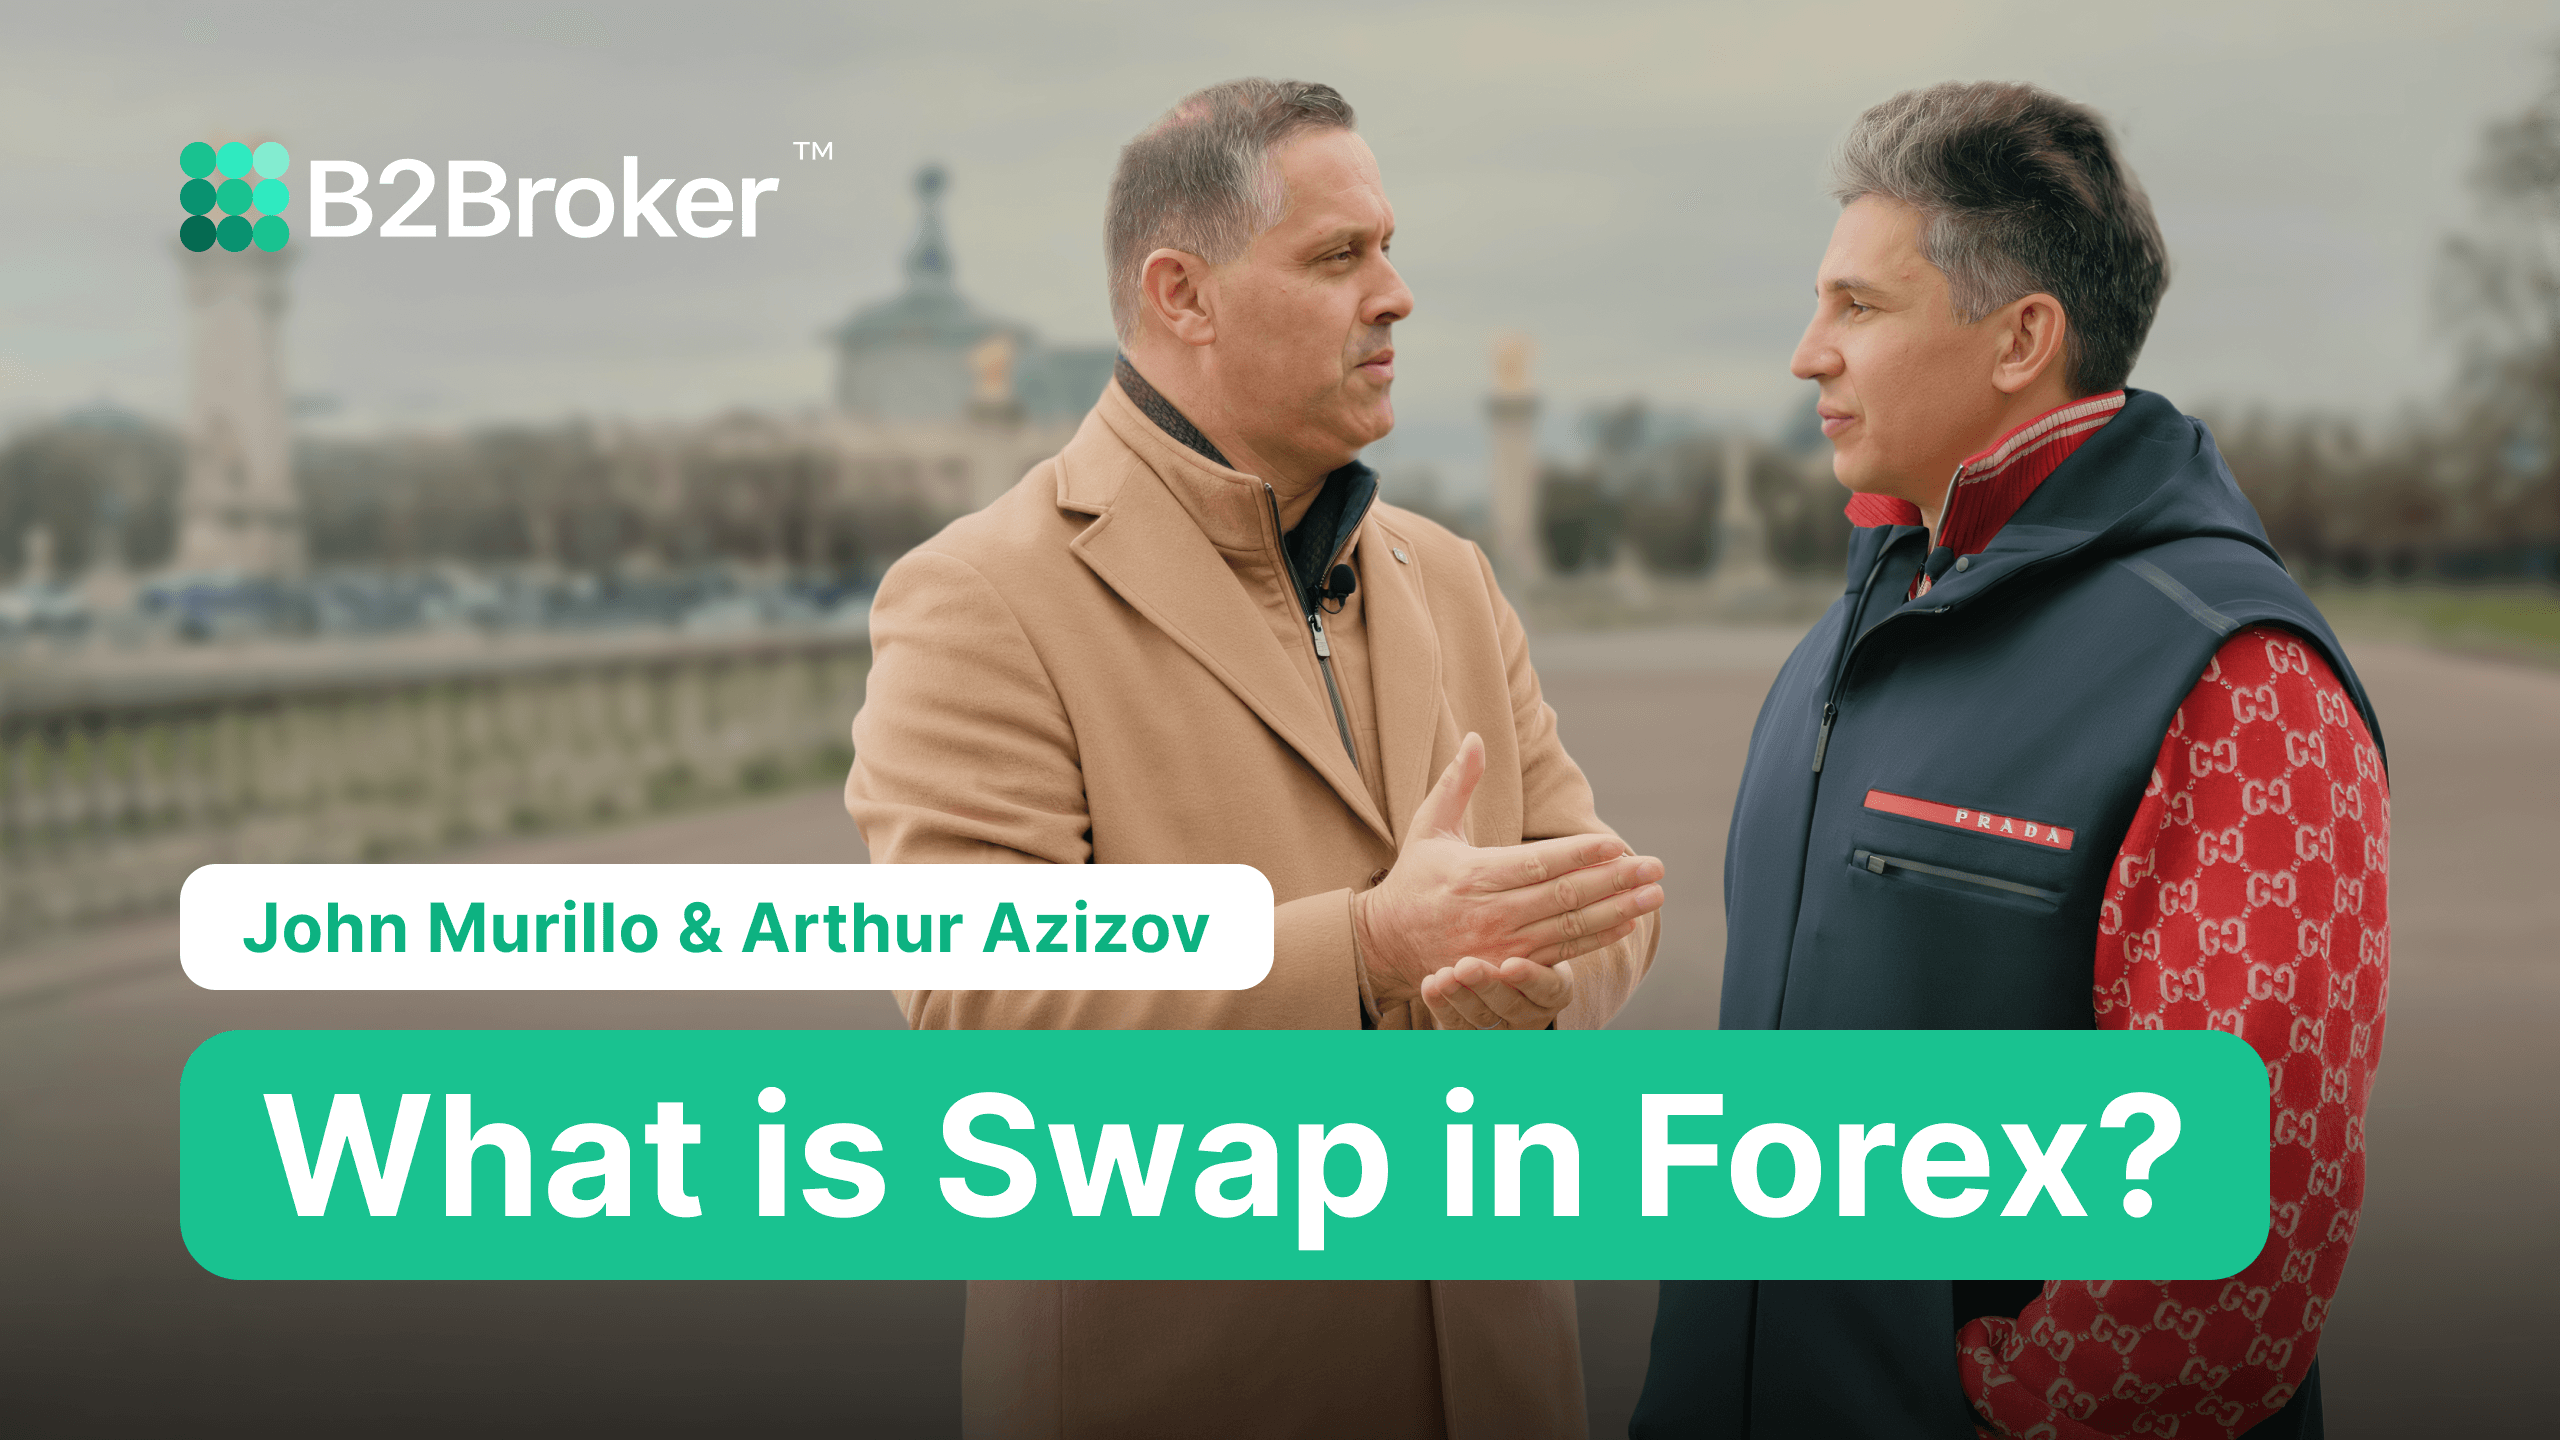 B2Broker Q&A | What is Swap in Forex?